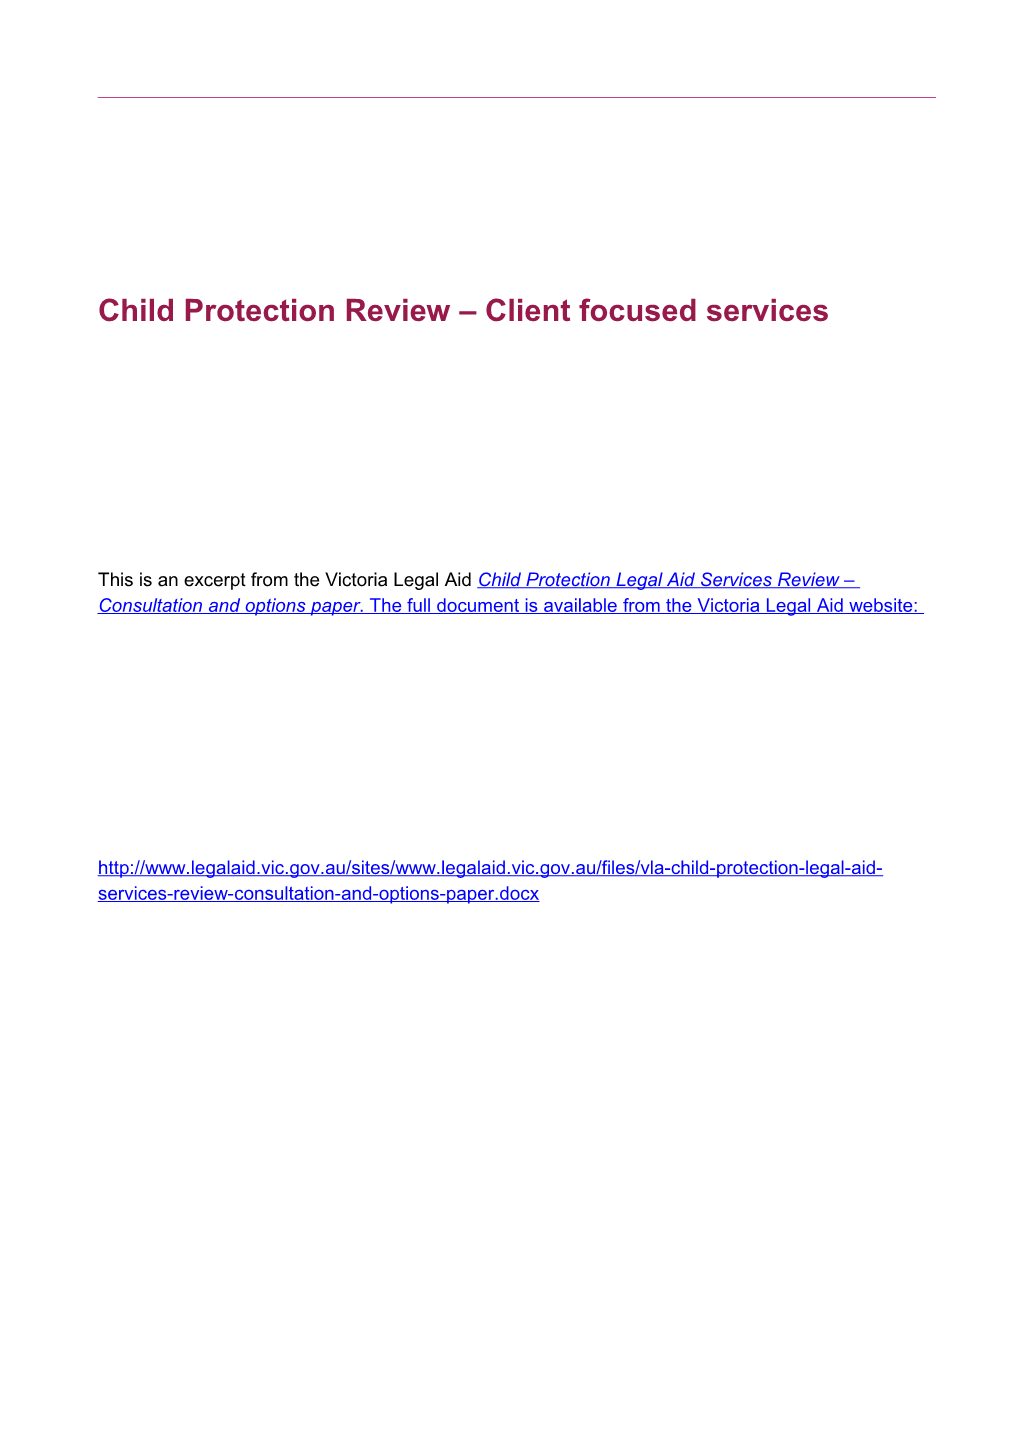 Child Protection Legal Aid Services Review Consultation and Options Paper s1